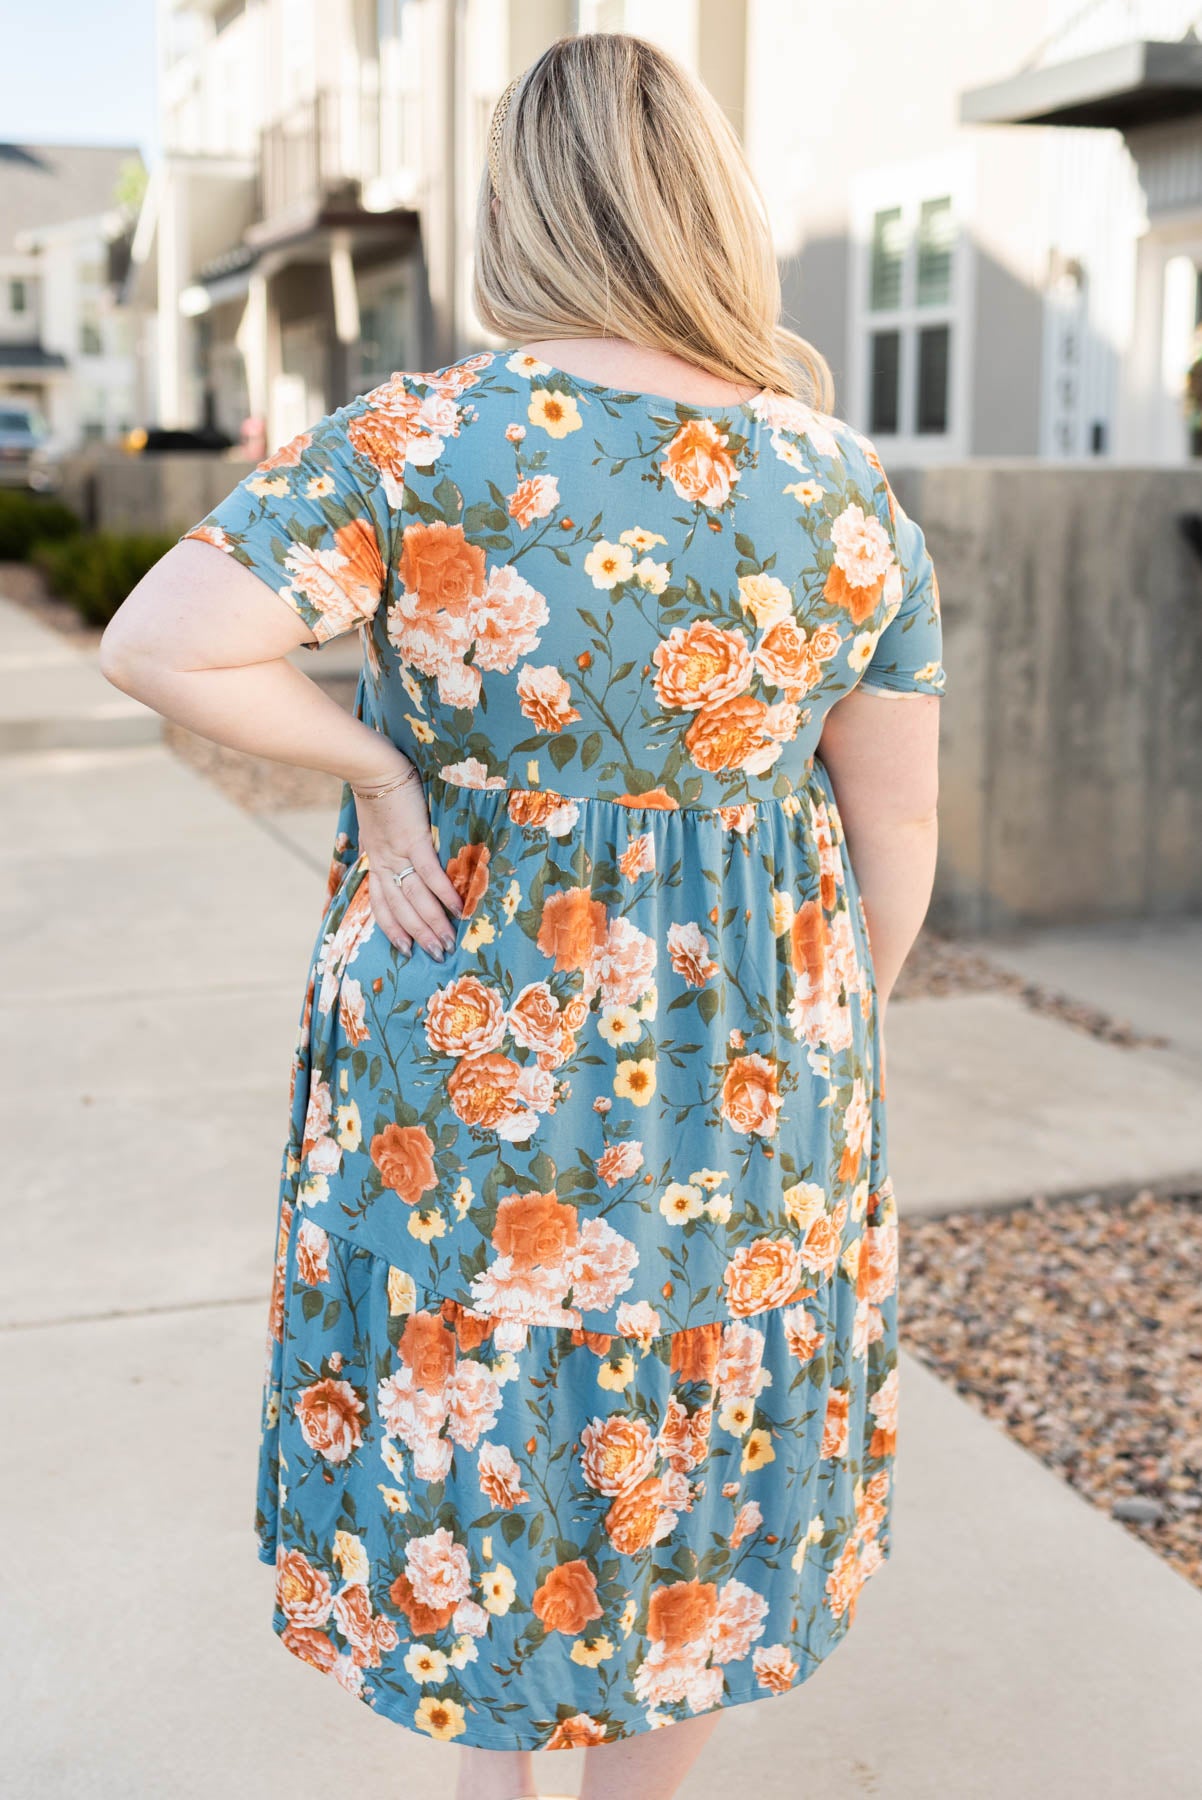 Back view of the plus size denim tiered dress